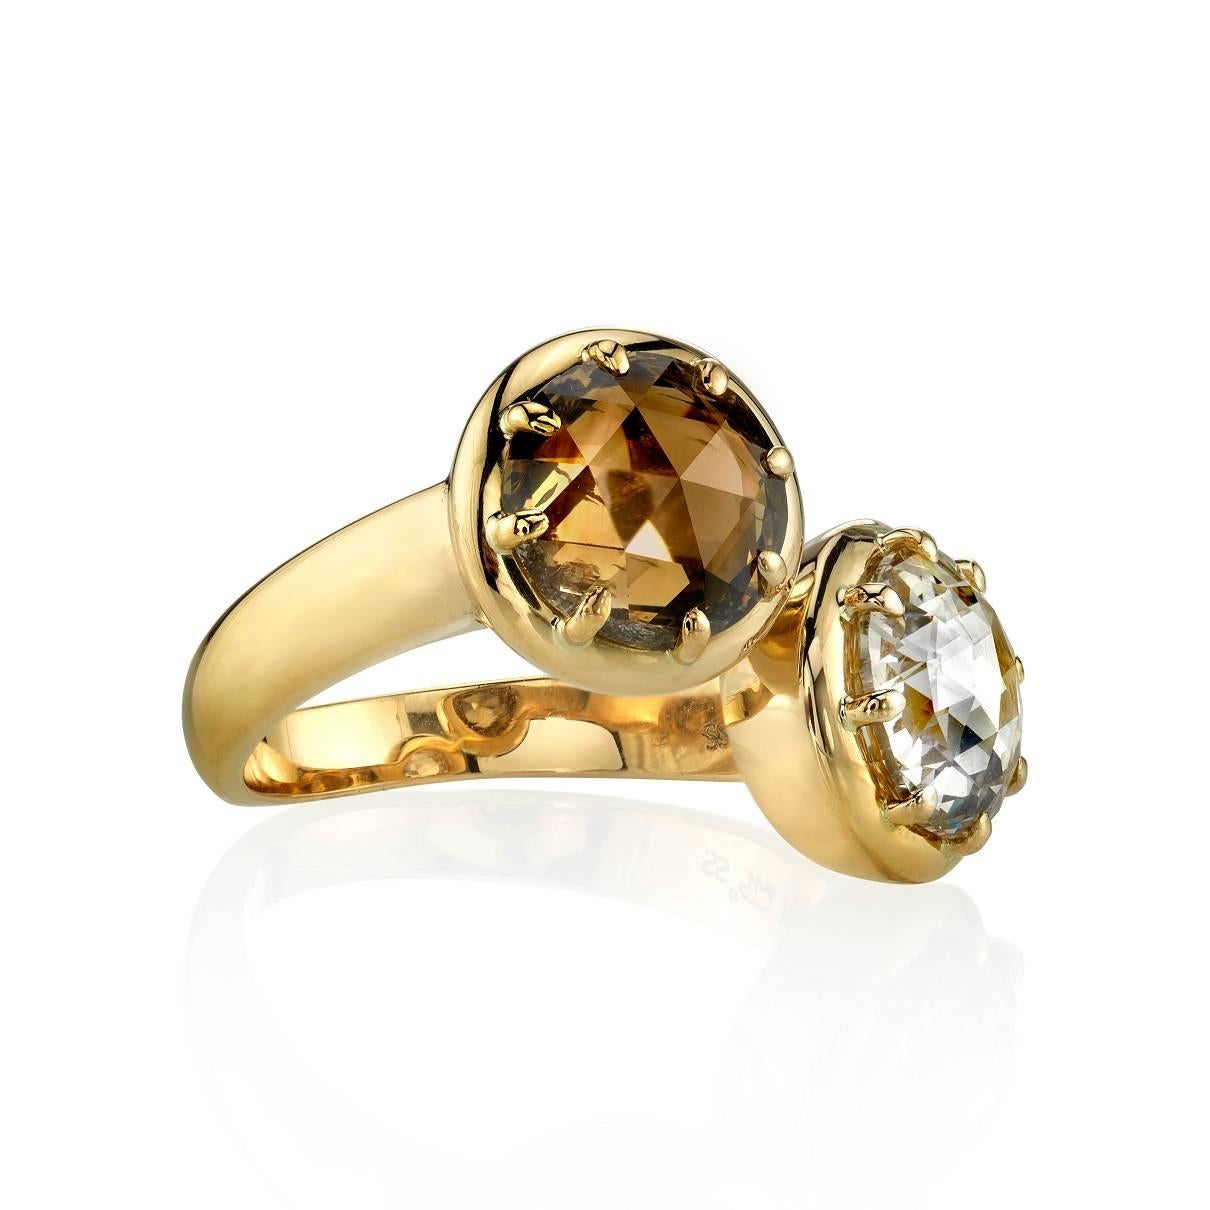 This beautiful bypass ring features a 2.24ct Dark Brown rose cut and a 2.05ct Light brown rose cut diamond set in a handcrafted 18k yellow gold ring. Smooth and comfortable, this ring is great as a right hand ring or alternative engagement ring. The